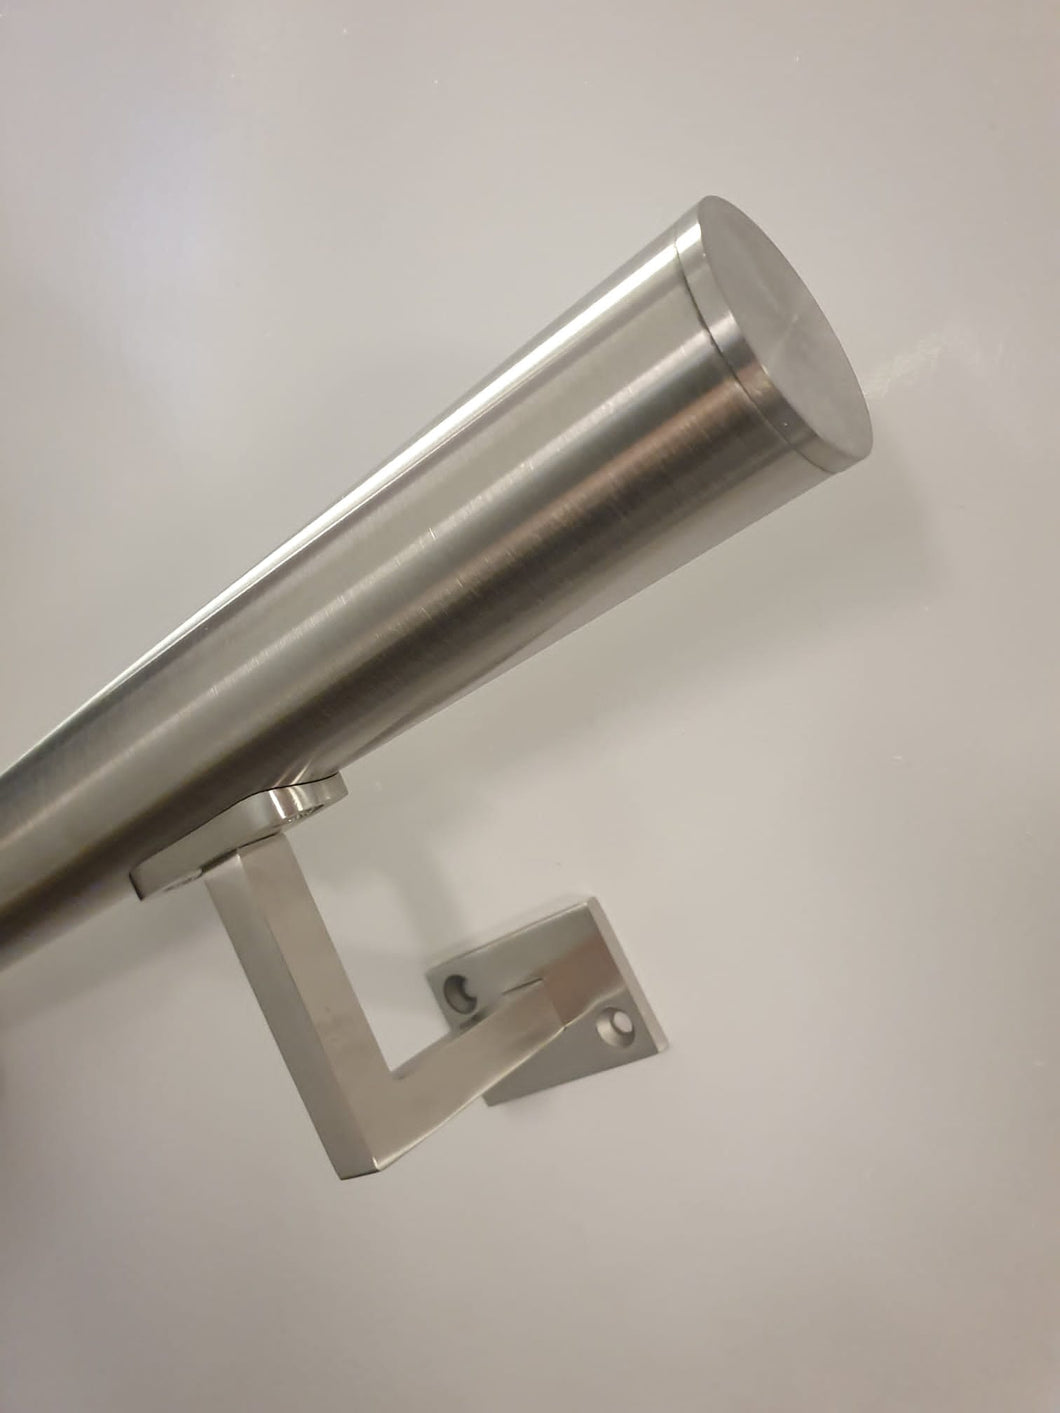 Stainless Steel Handrail With Flat Ends Hybrid Bracket